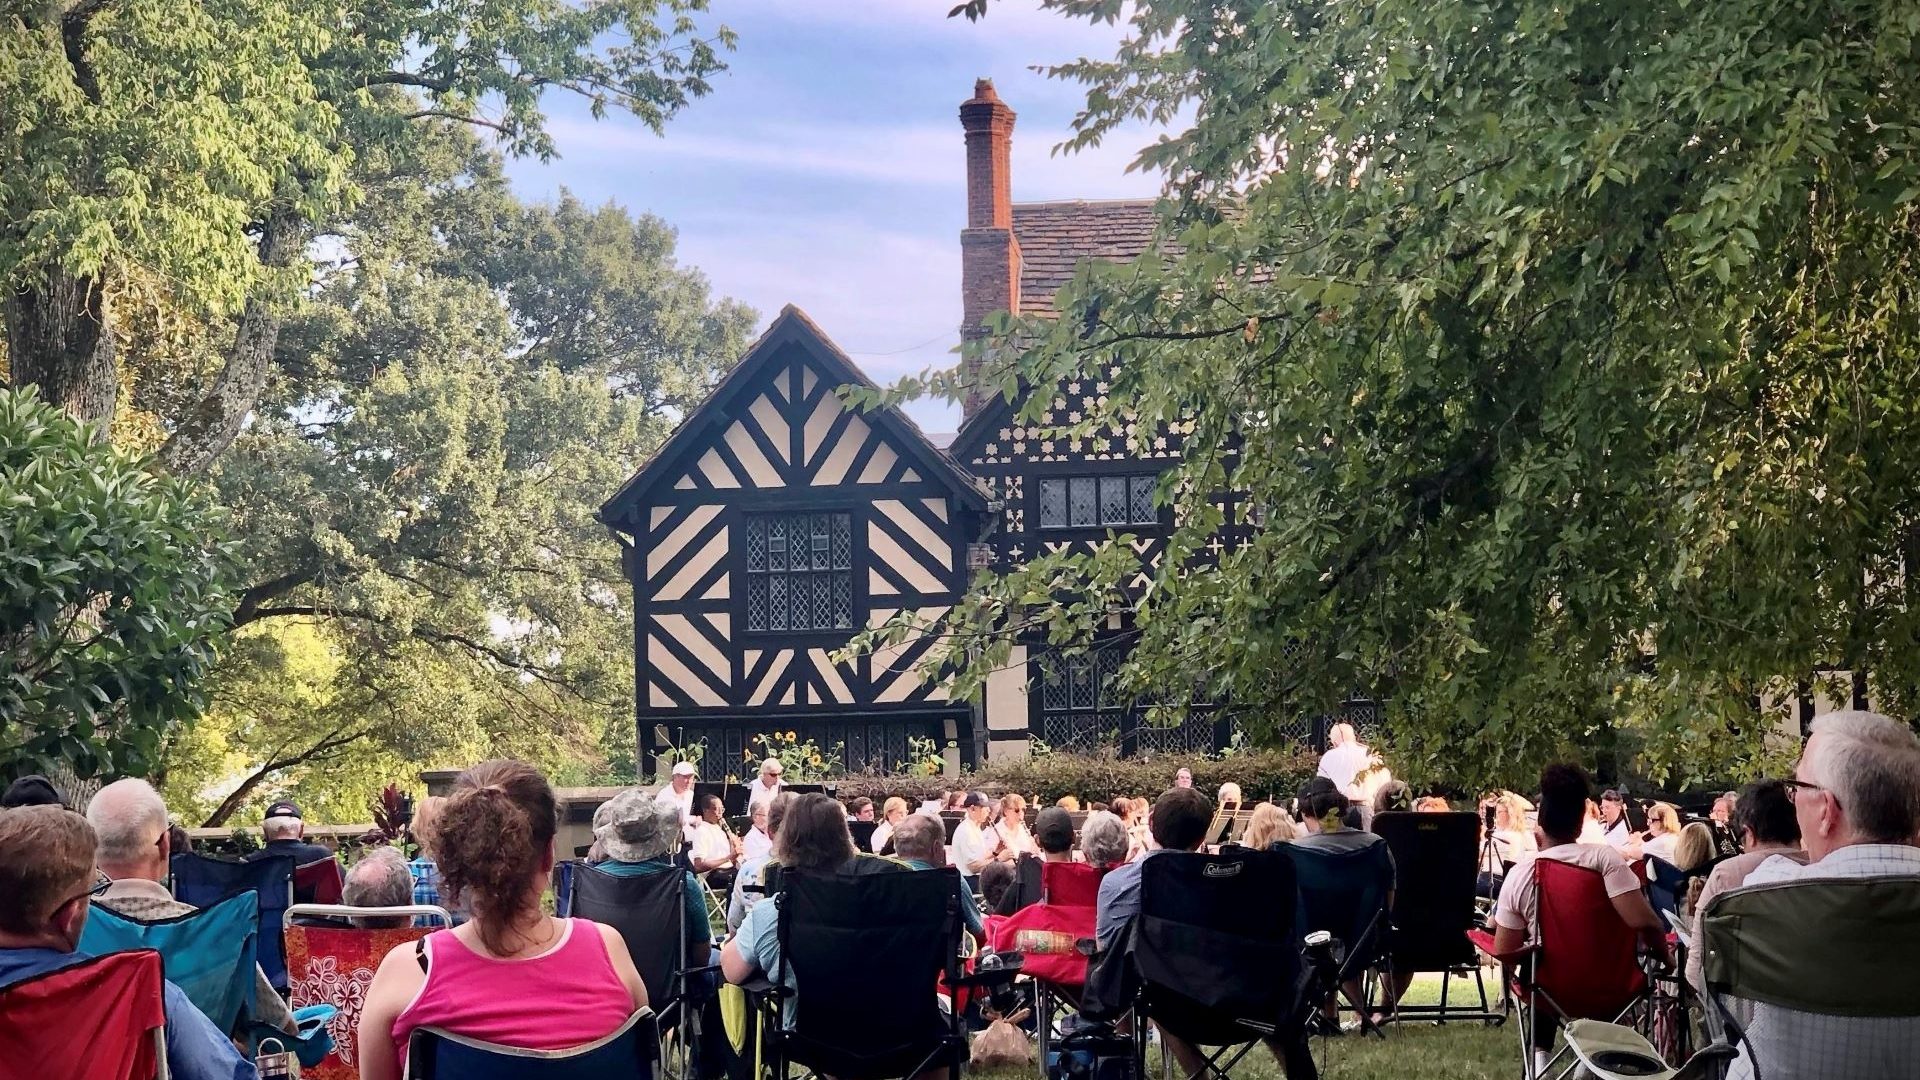 This 15th-century English Tudor mansion brought to our city piece by piece is a lovely backdrop for a picnic in the garden while listening to a free outdoor concert. A cheap but lovely date night!